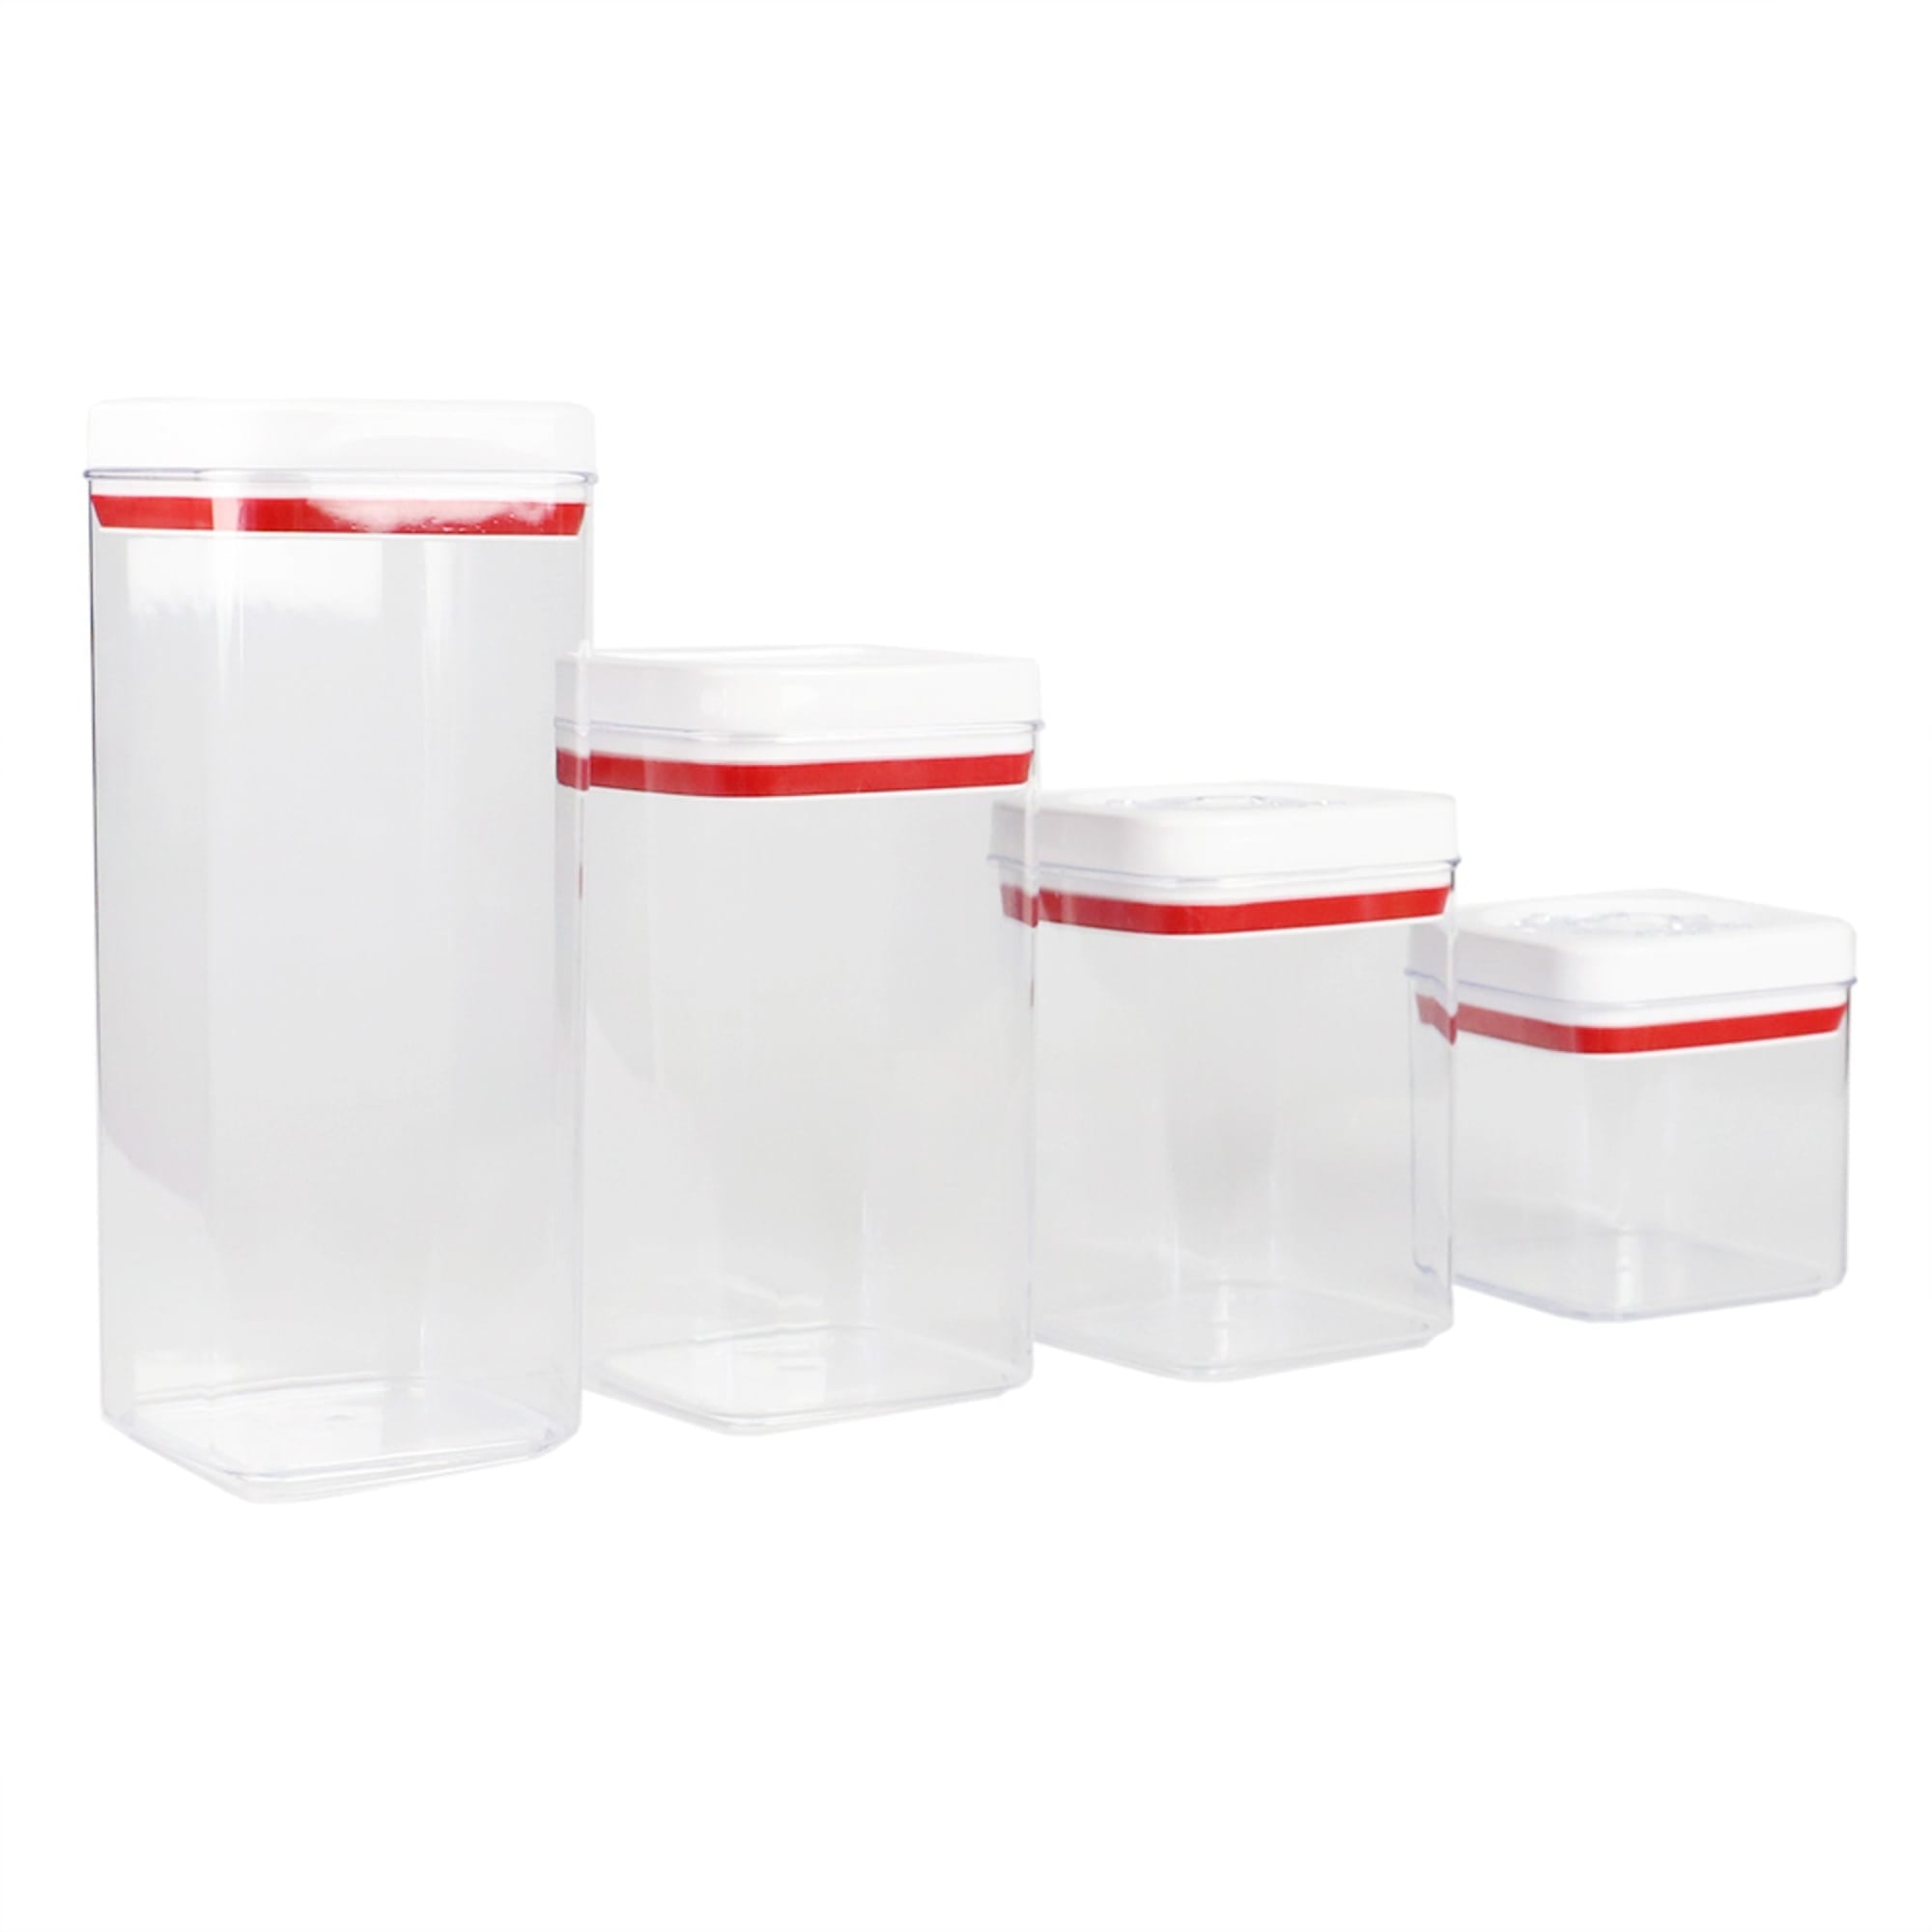 Home Basics 4 Piece Twist N’ Lock Square Canister Set $25.00 EACH, CASE PACK OF 6